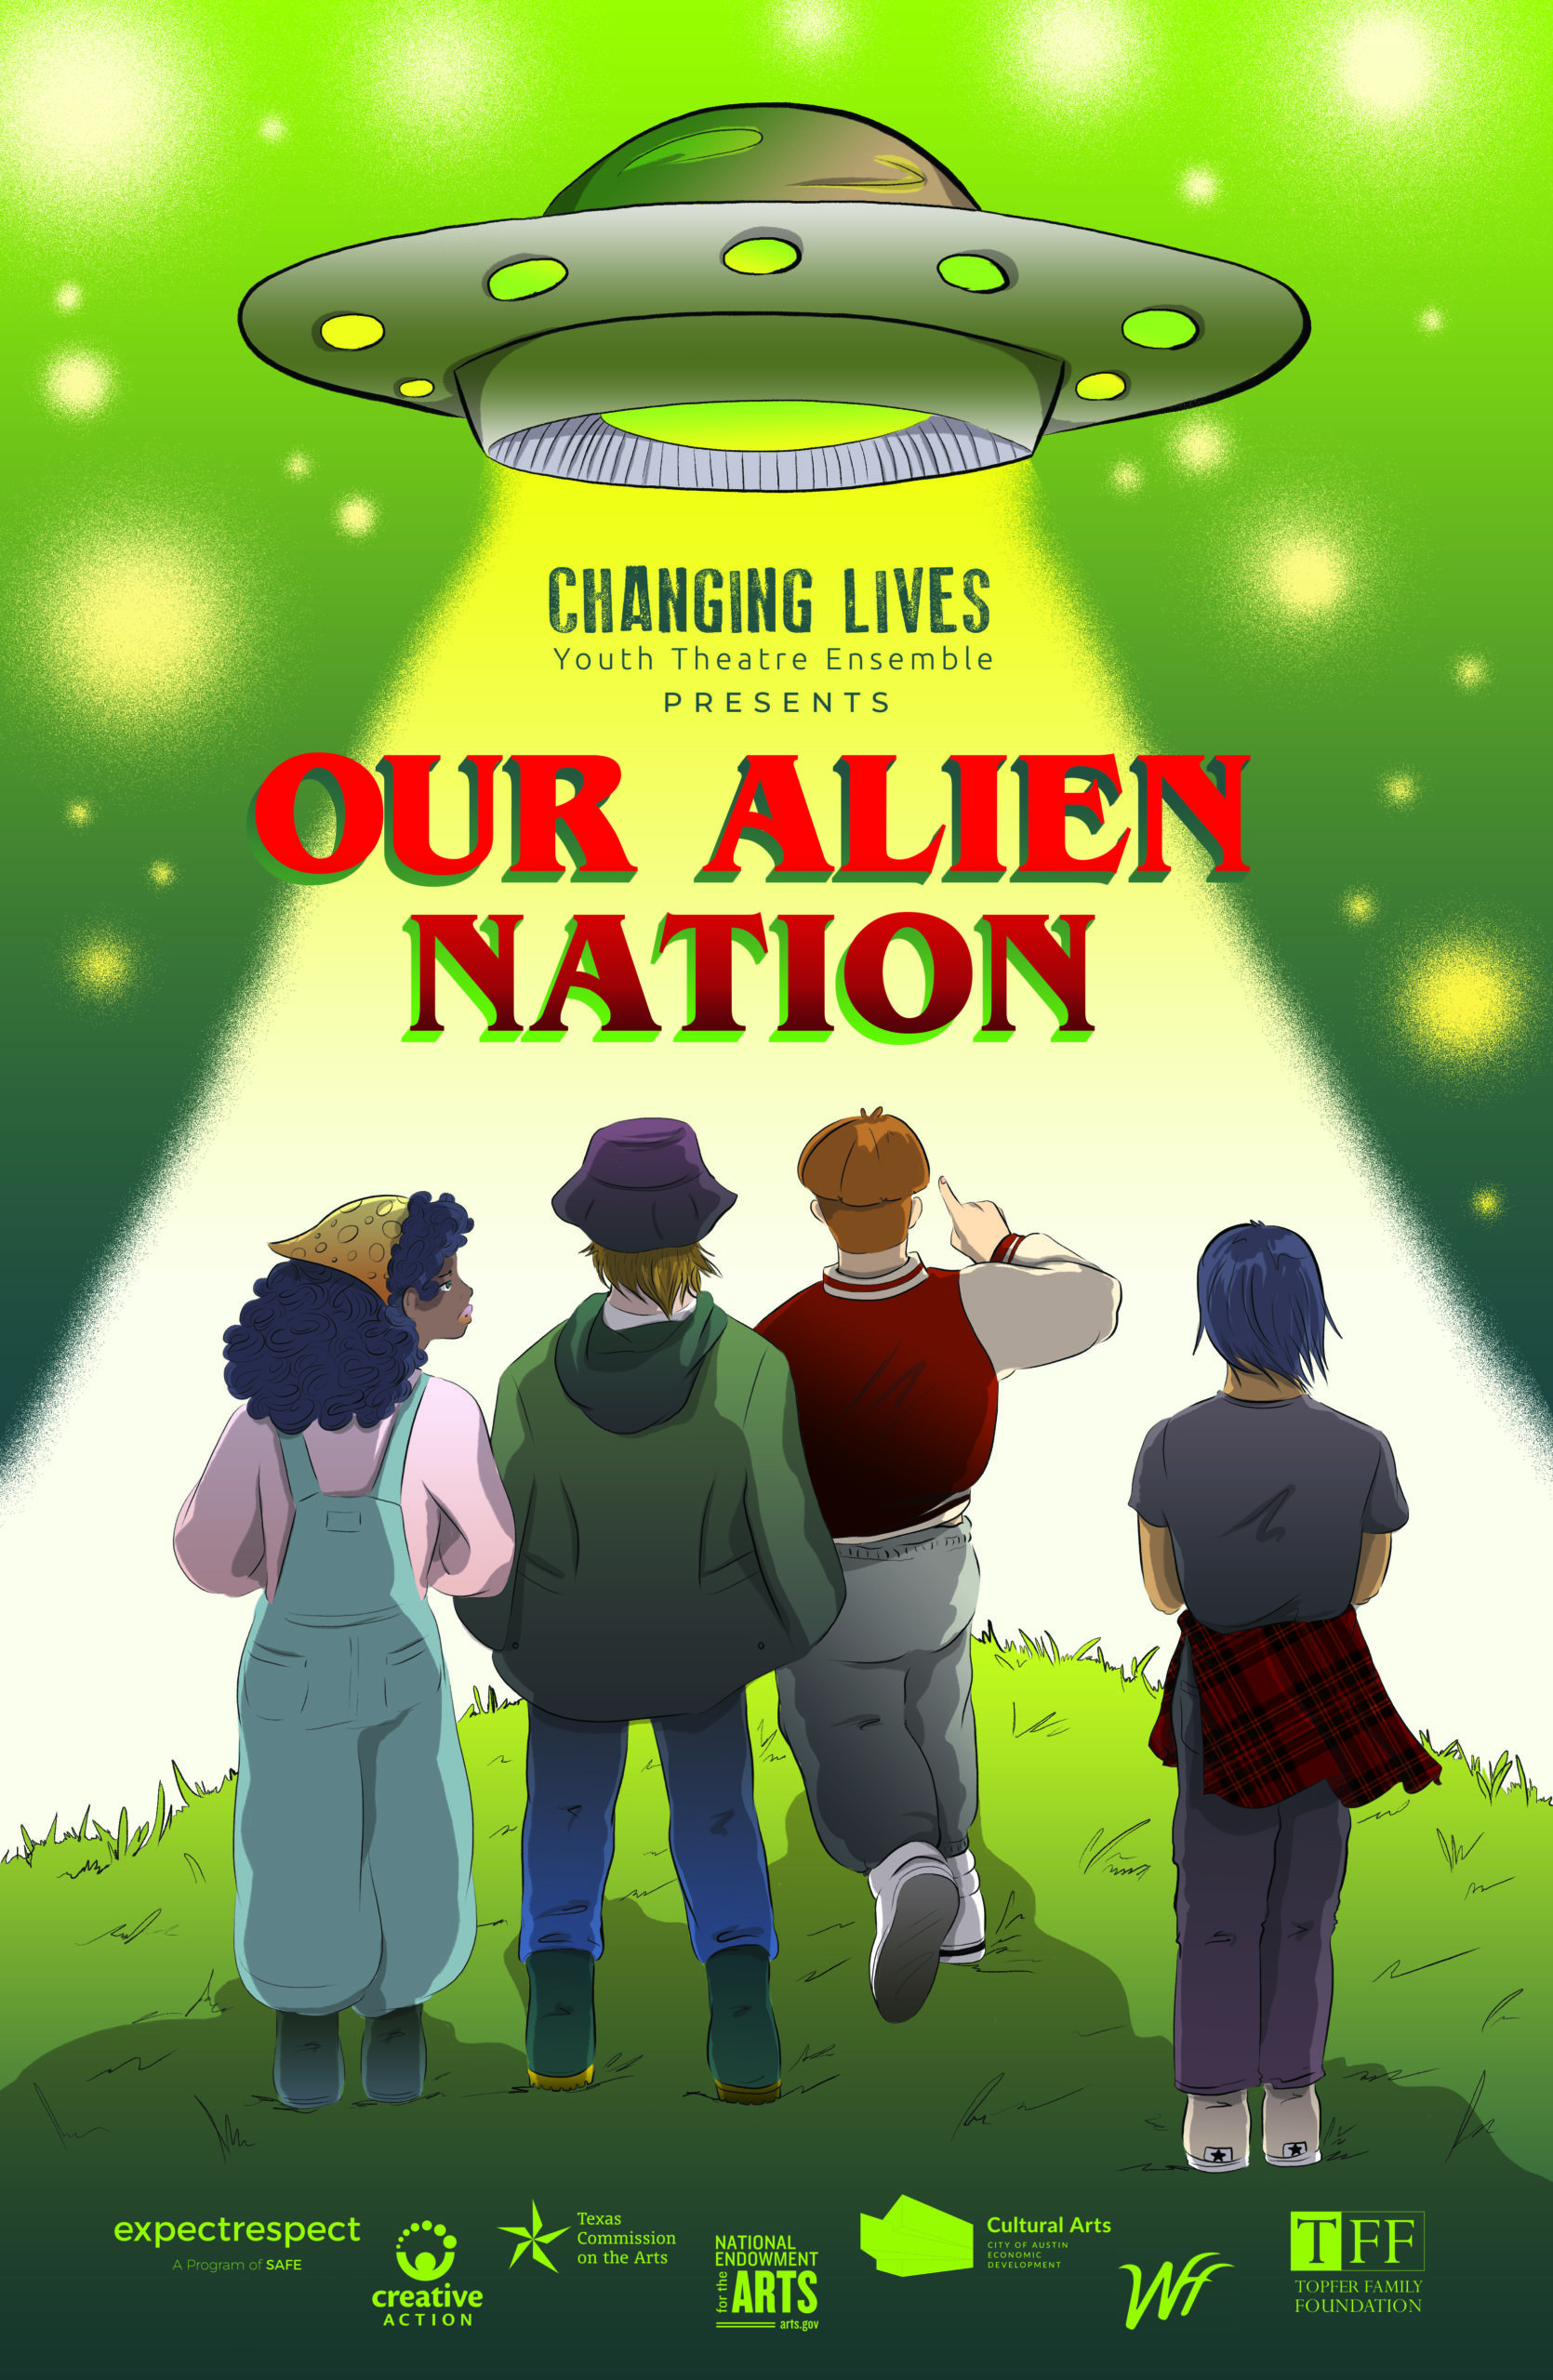 Image description: A poster for a play that includes and illustration of four teens facing away from the viewer. They are lookin up at a UFO. The words "OUR ALIEN NATION" are in big, green text. This is the title of the play.